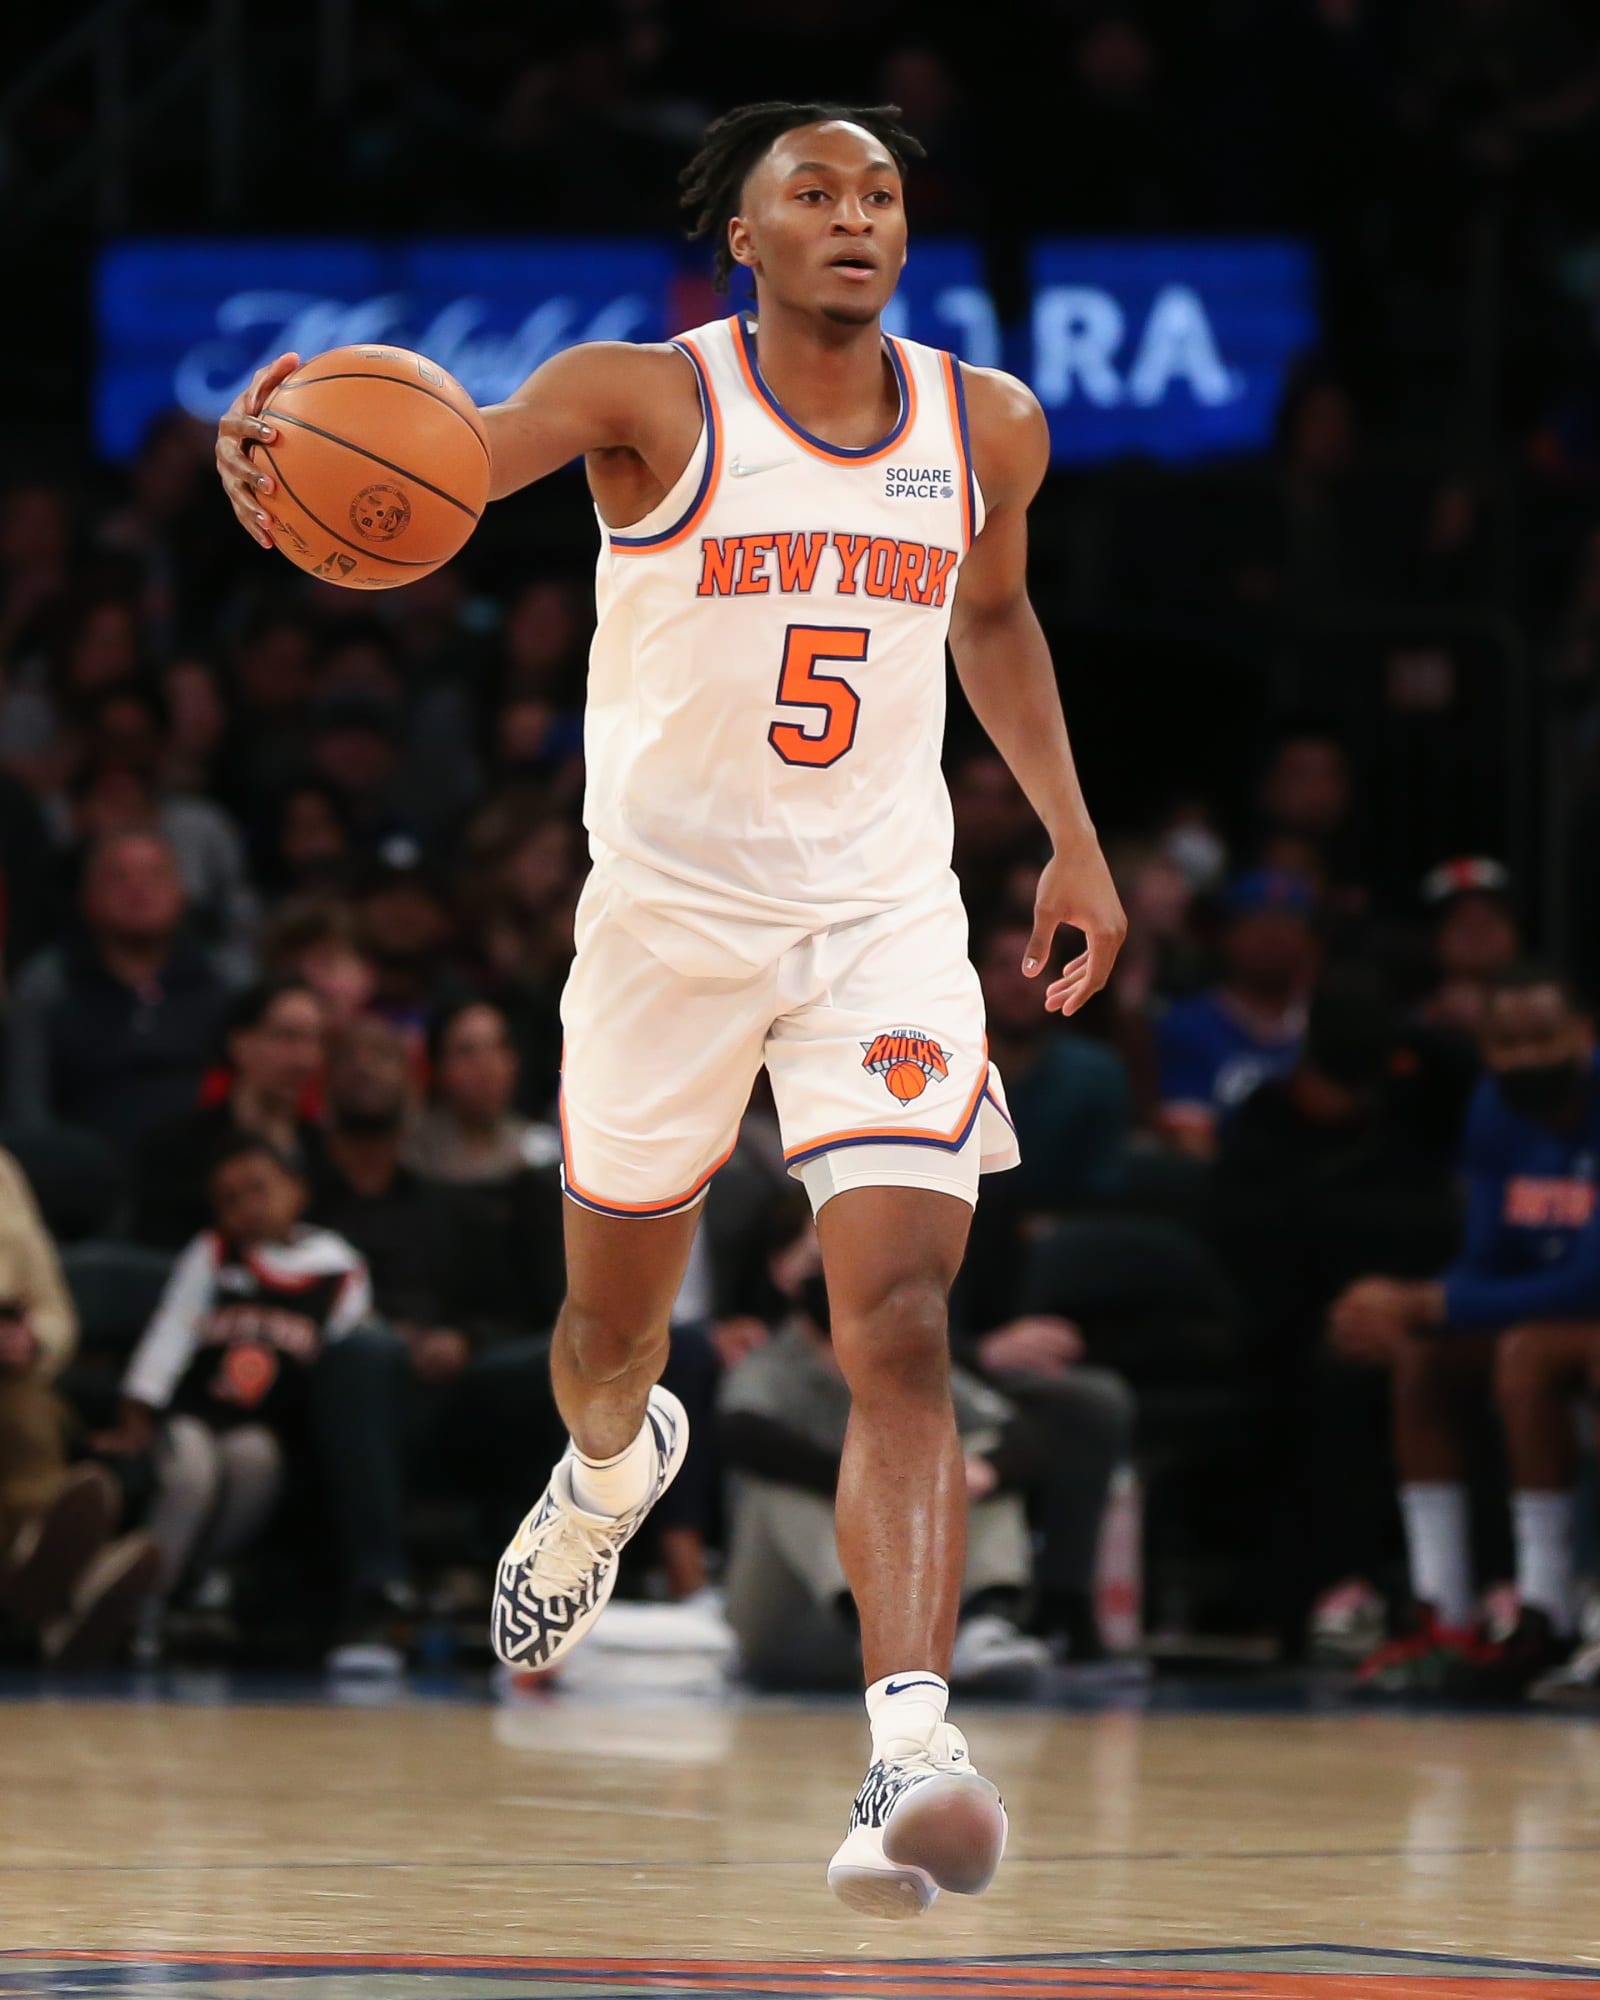 Immanuel Quickley shines in Knicks preseason win over Celtics - Posting and  Toasting